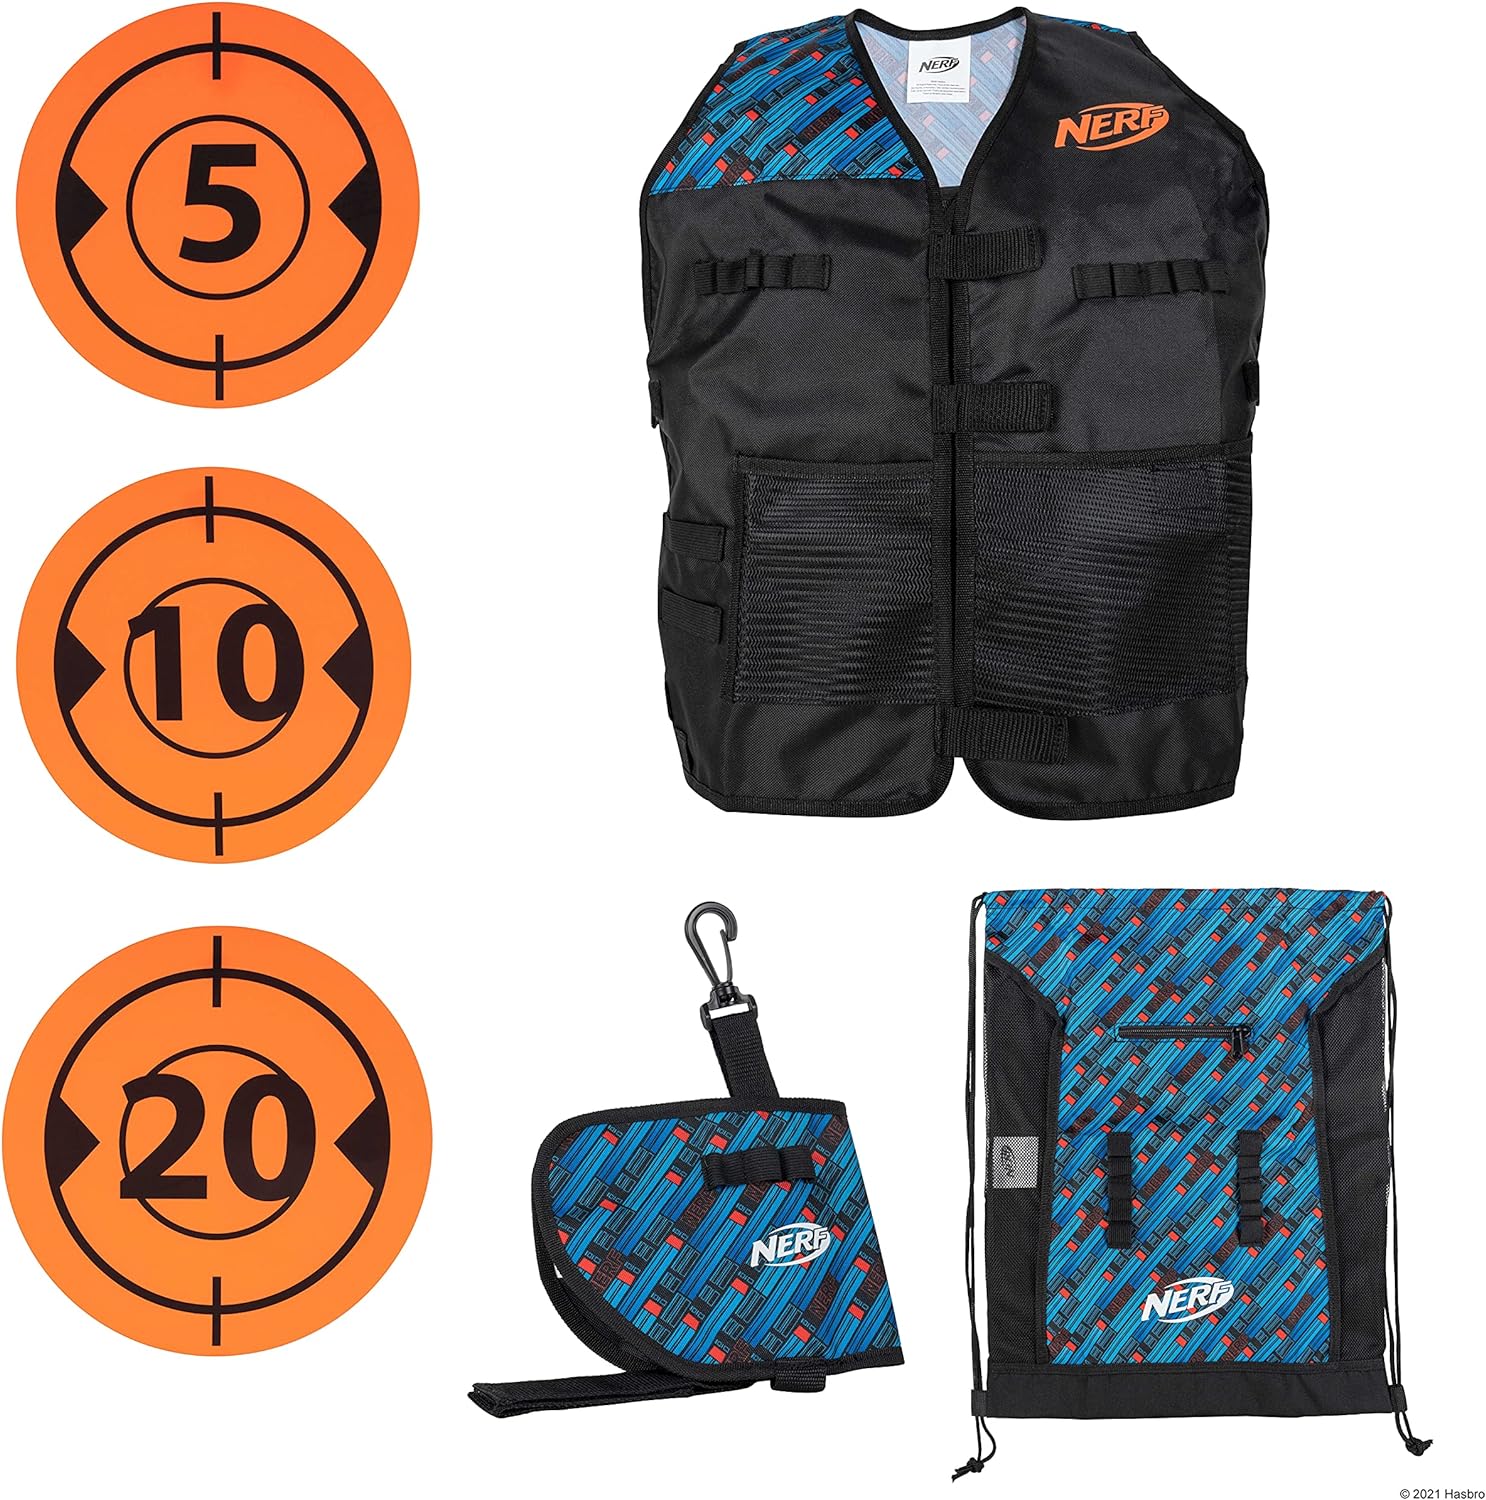 NERF Elite Deluxe Tactical Gear Pack - Tactical Vest with Hip Holster, Cinch Backpack, and 5 Targets - Blast Into Battle